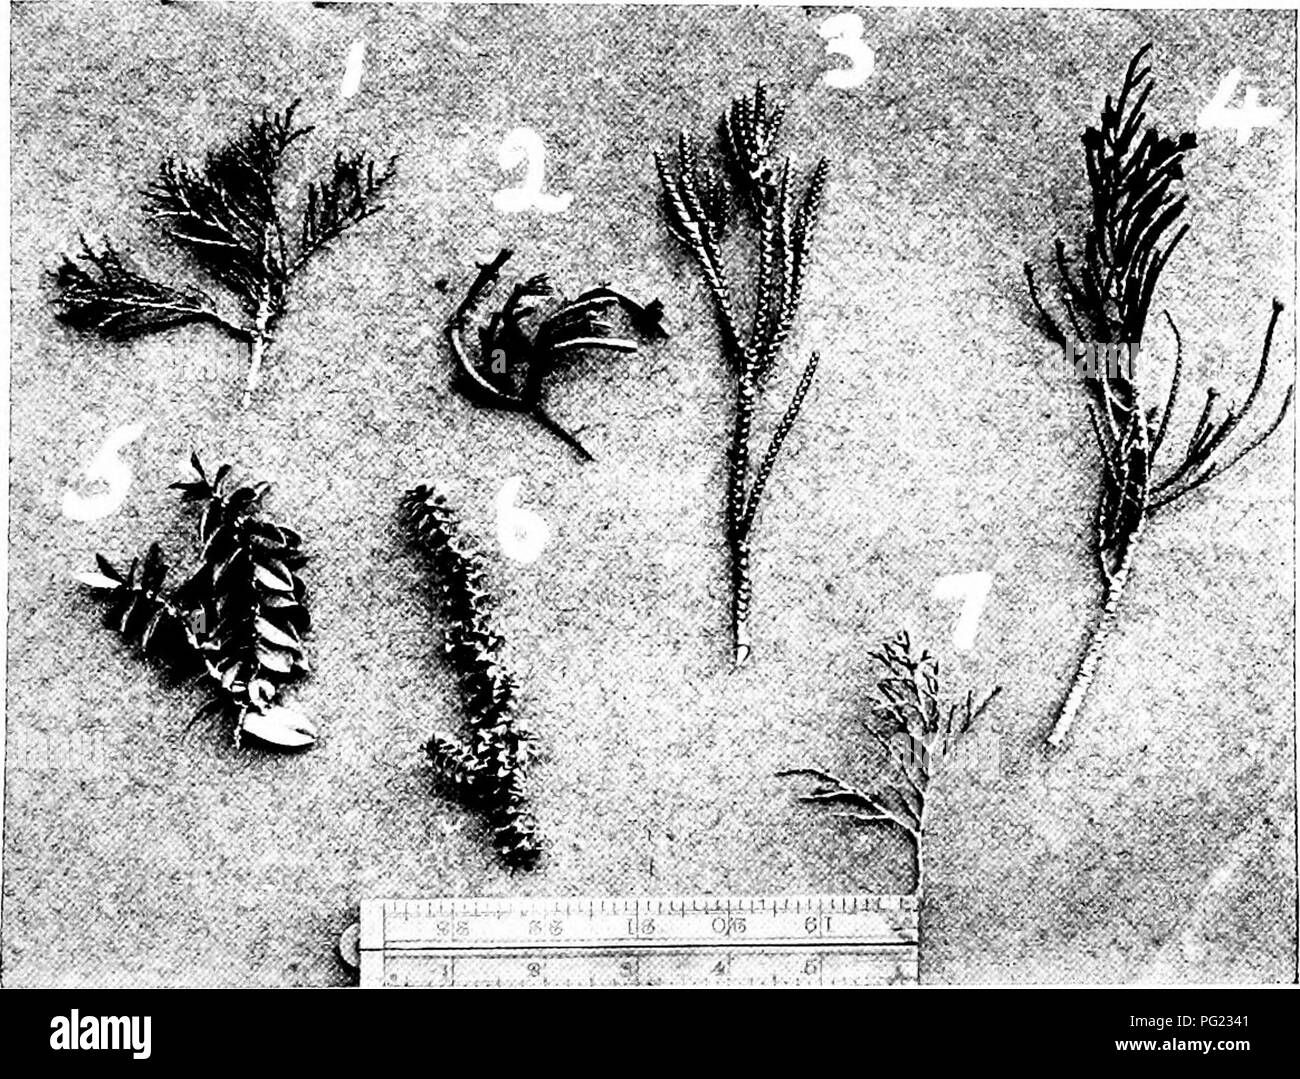 . Plants of New Zealand . Botany. THE SNAP-DRAGON FAMILY 373 of HeUcJirtjsum belonging to the sub-genus Ozothamnus (v. fig. 1'21). A partial clue to their origin is to be found m the fact that all species of this section, under certain circumstances, put forth leaves of a type, widely distinct from, and much more normal, than the scale-like plates with which they are usually covered. A similar phenomenon appears in many other aberrant plants. Otlier New Zealand species which. Fig. 1-23. 1. V. propinqua. 2. V. tetrasticha. 3. V. Hectori. 4. V. .Vviiistrongii. .5. V. elliptica. 6. V. epacridea.  Stock Photo